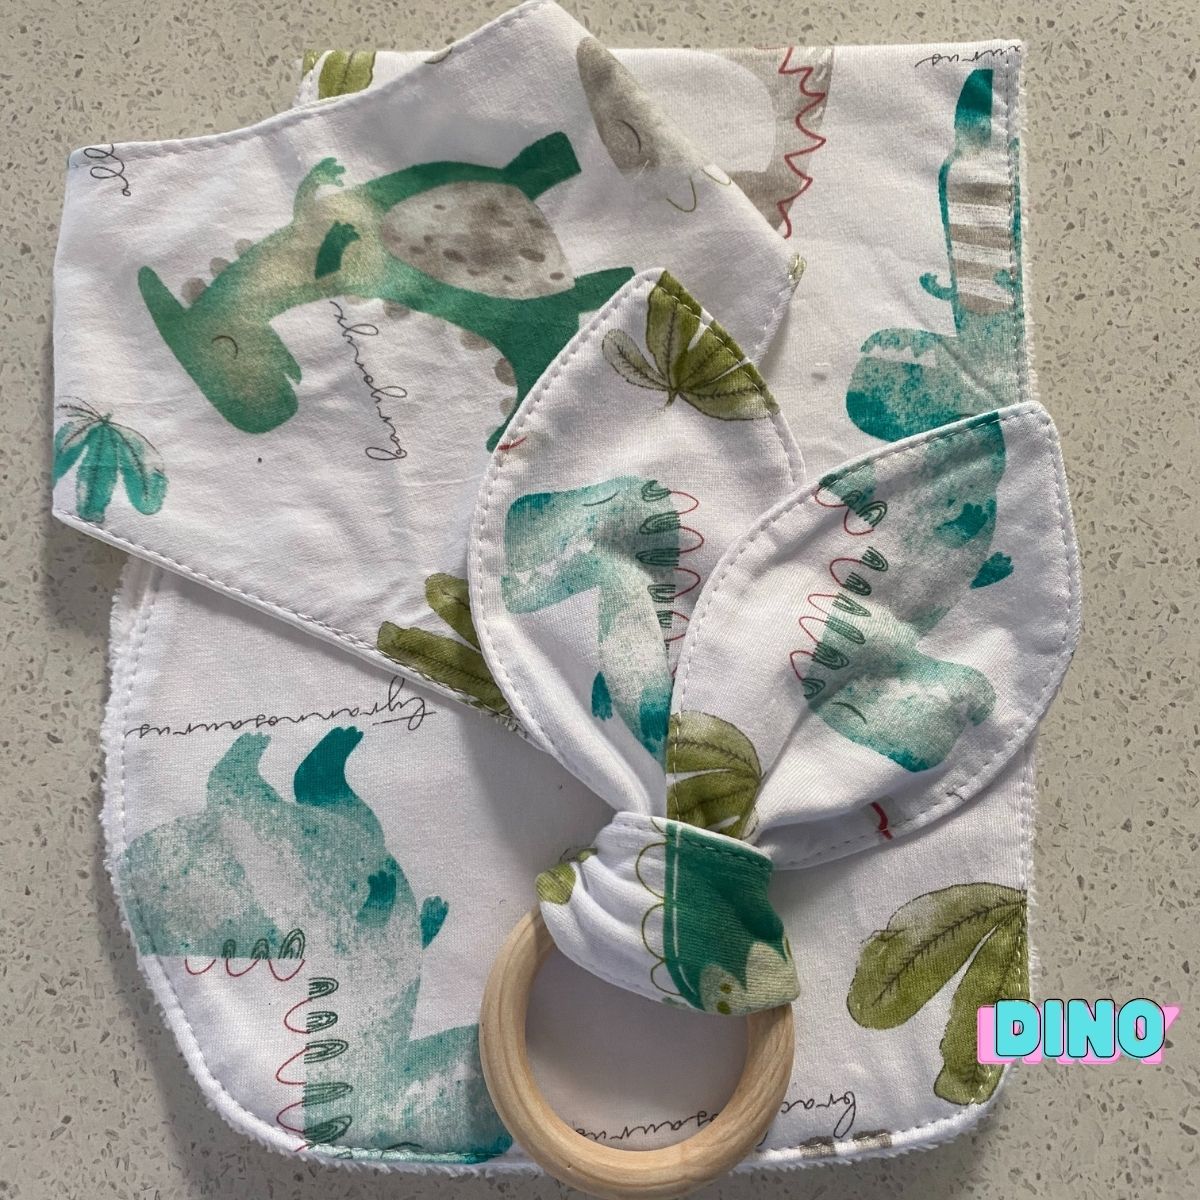 Mum And Bub Baby Shower Gift (includes Gift Voucher) - Belly Bands